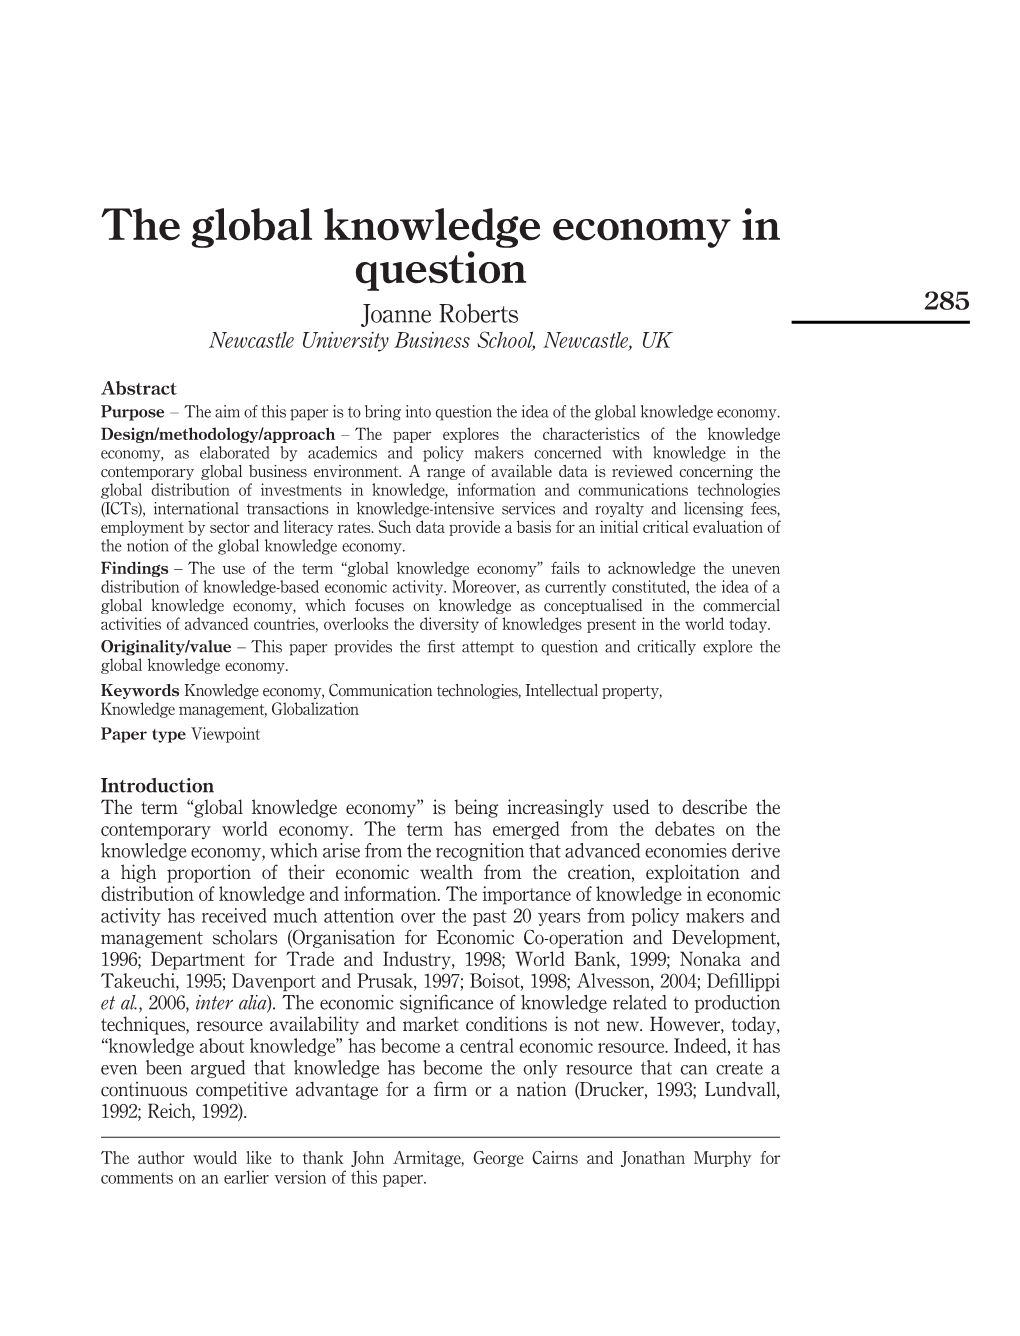 The Global Knowledge Economy in Question